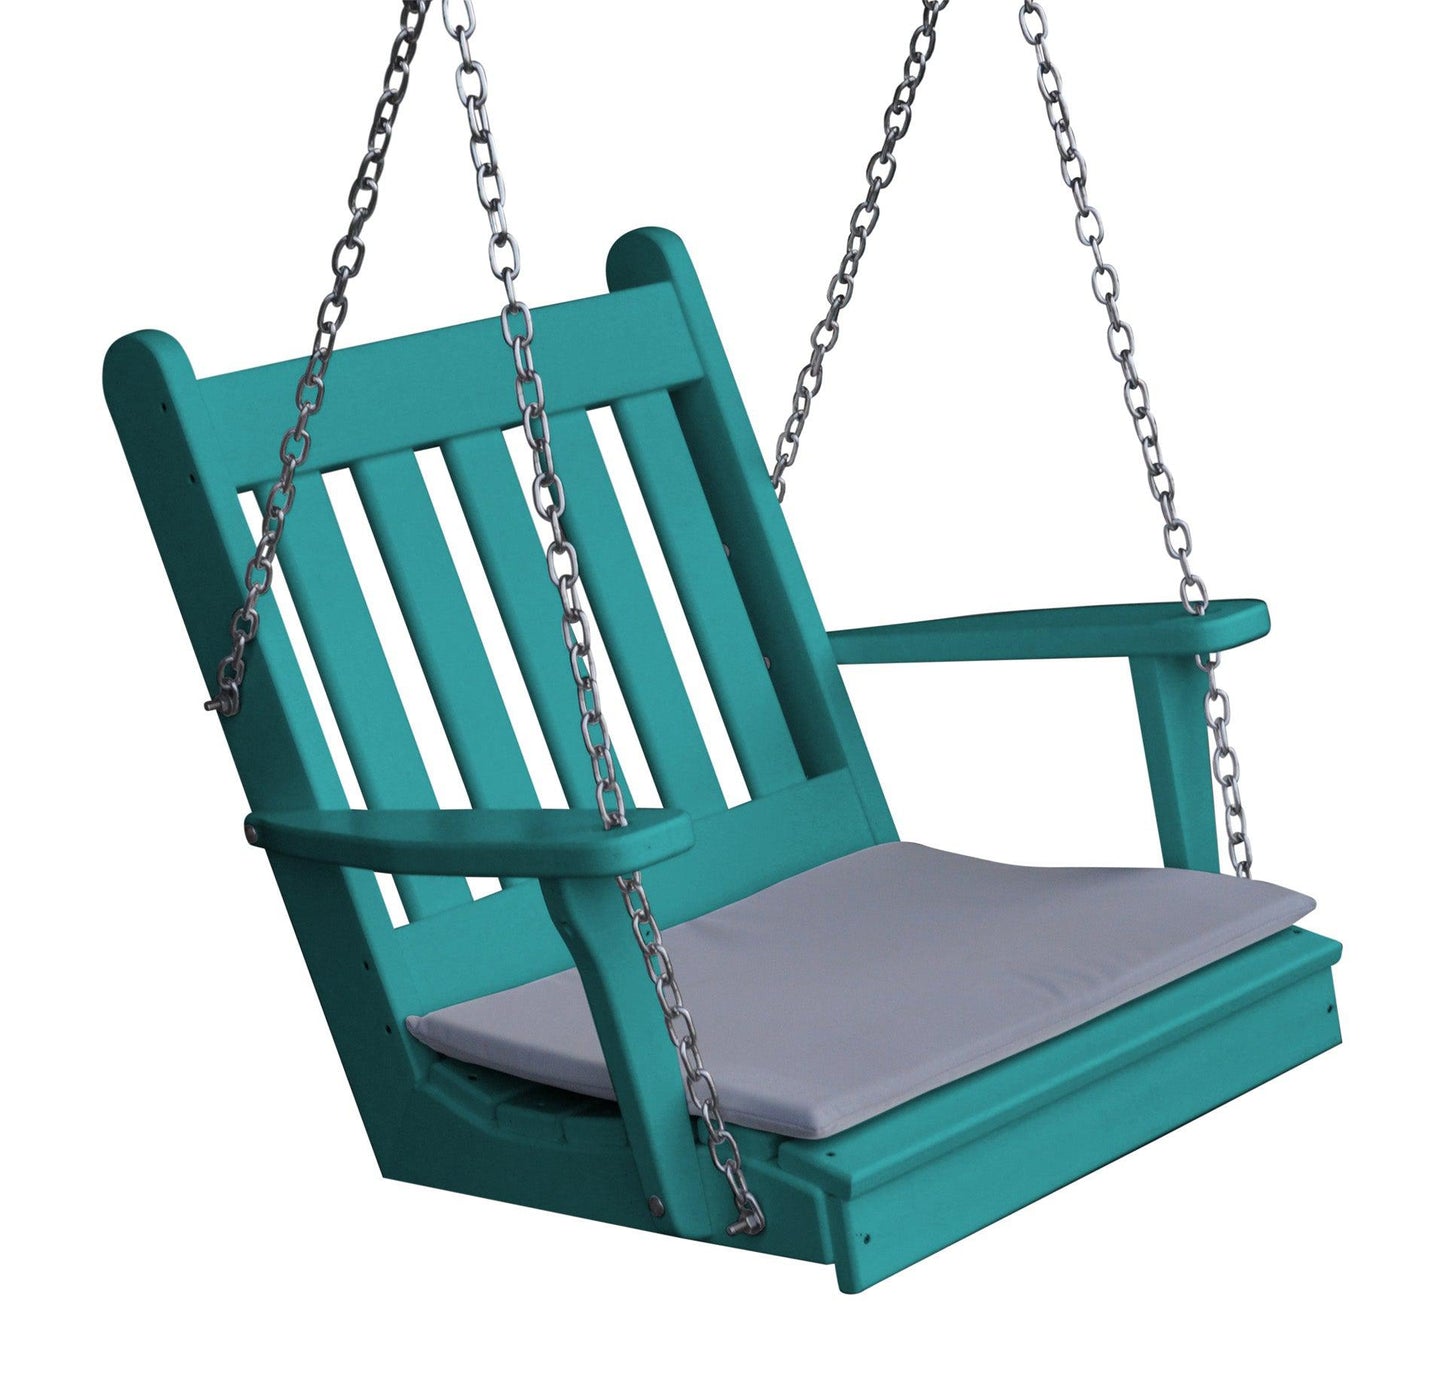 A&L Furniture Co. Traditional English Recycled Plastic Single Porch Swing - LEAD TIME TO SHIP 10 BUSINESS DAYS